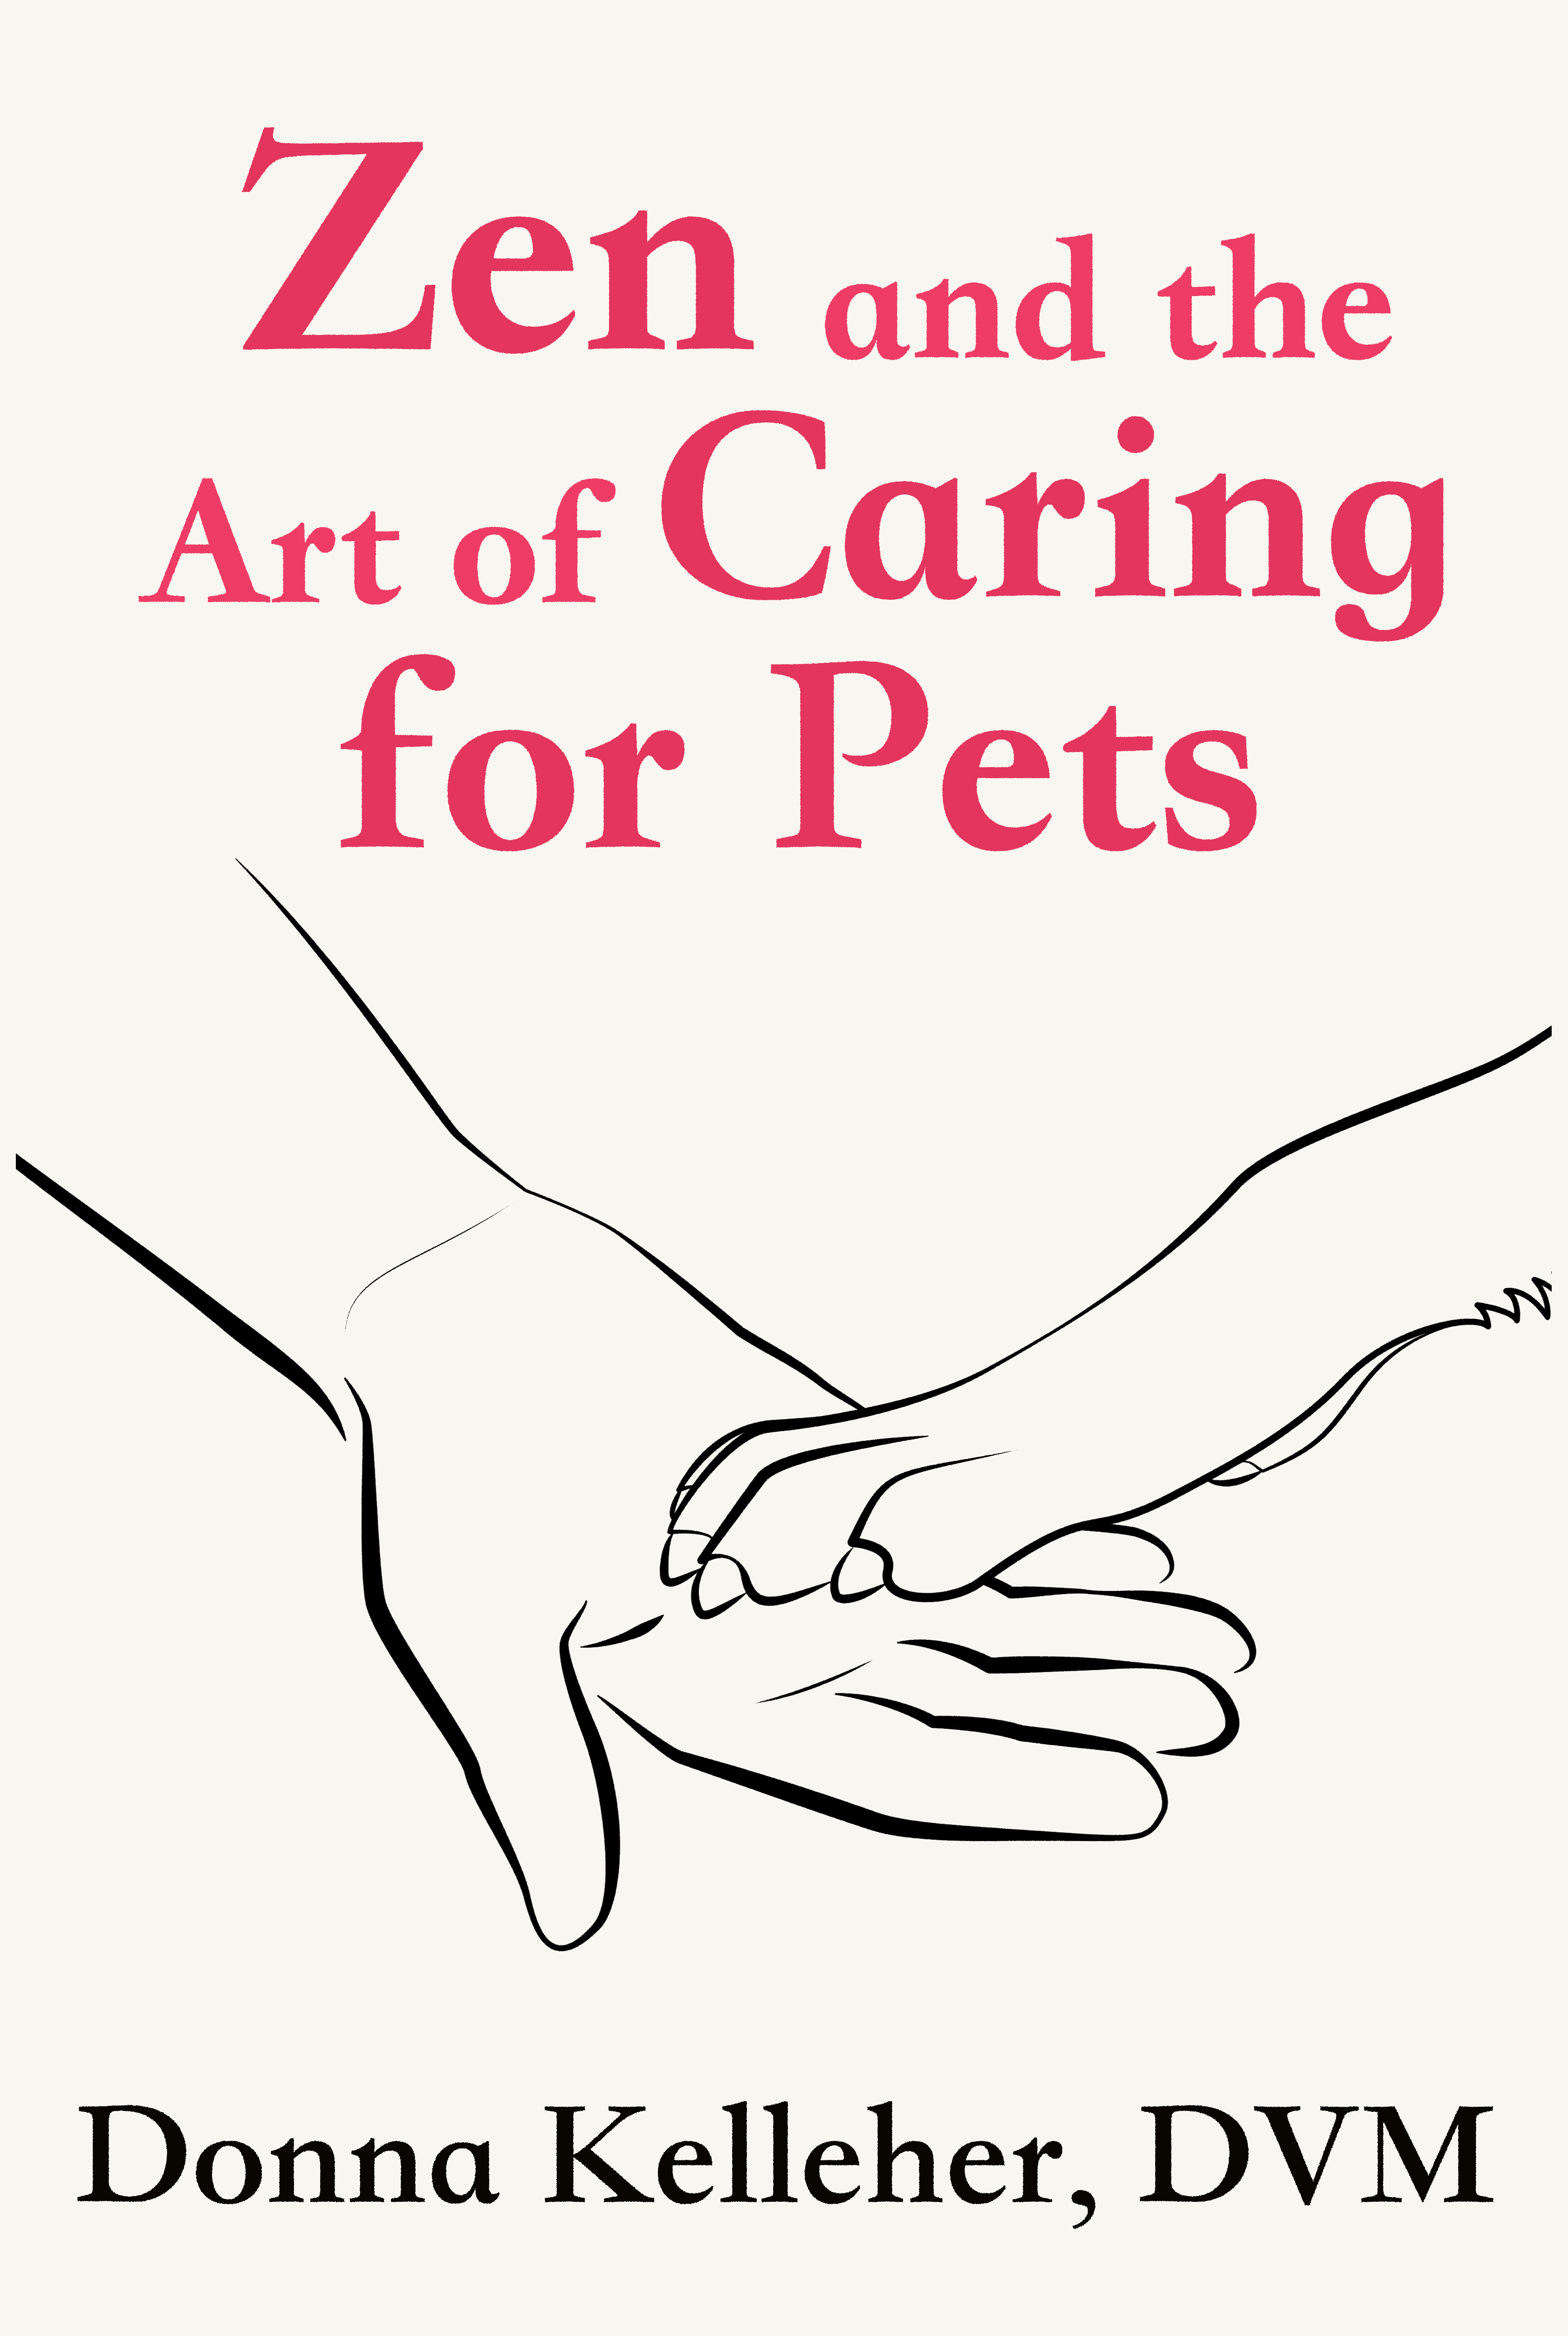 Zen and the Art of Caring for Pets